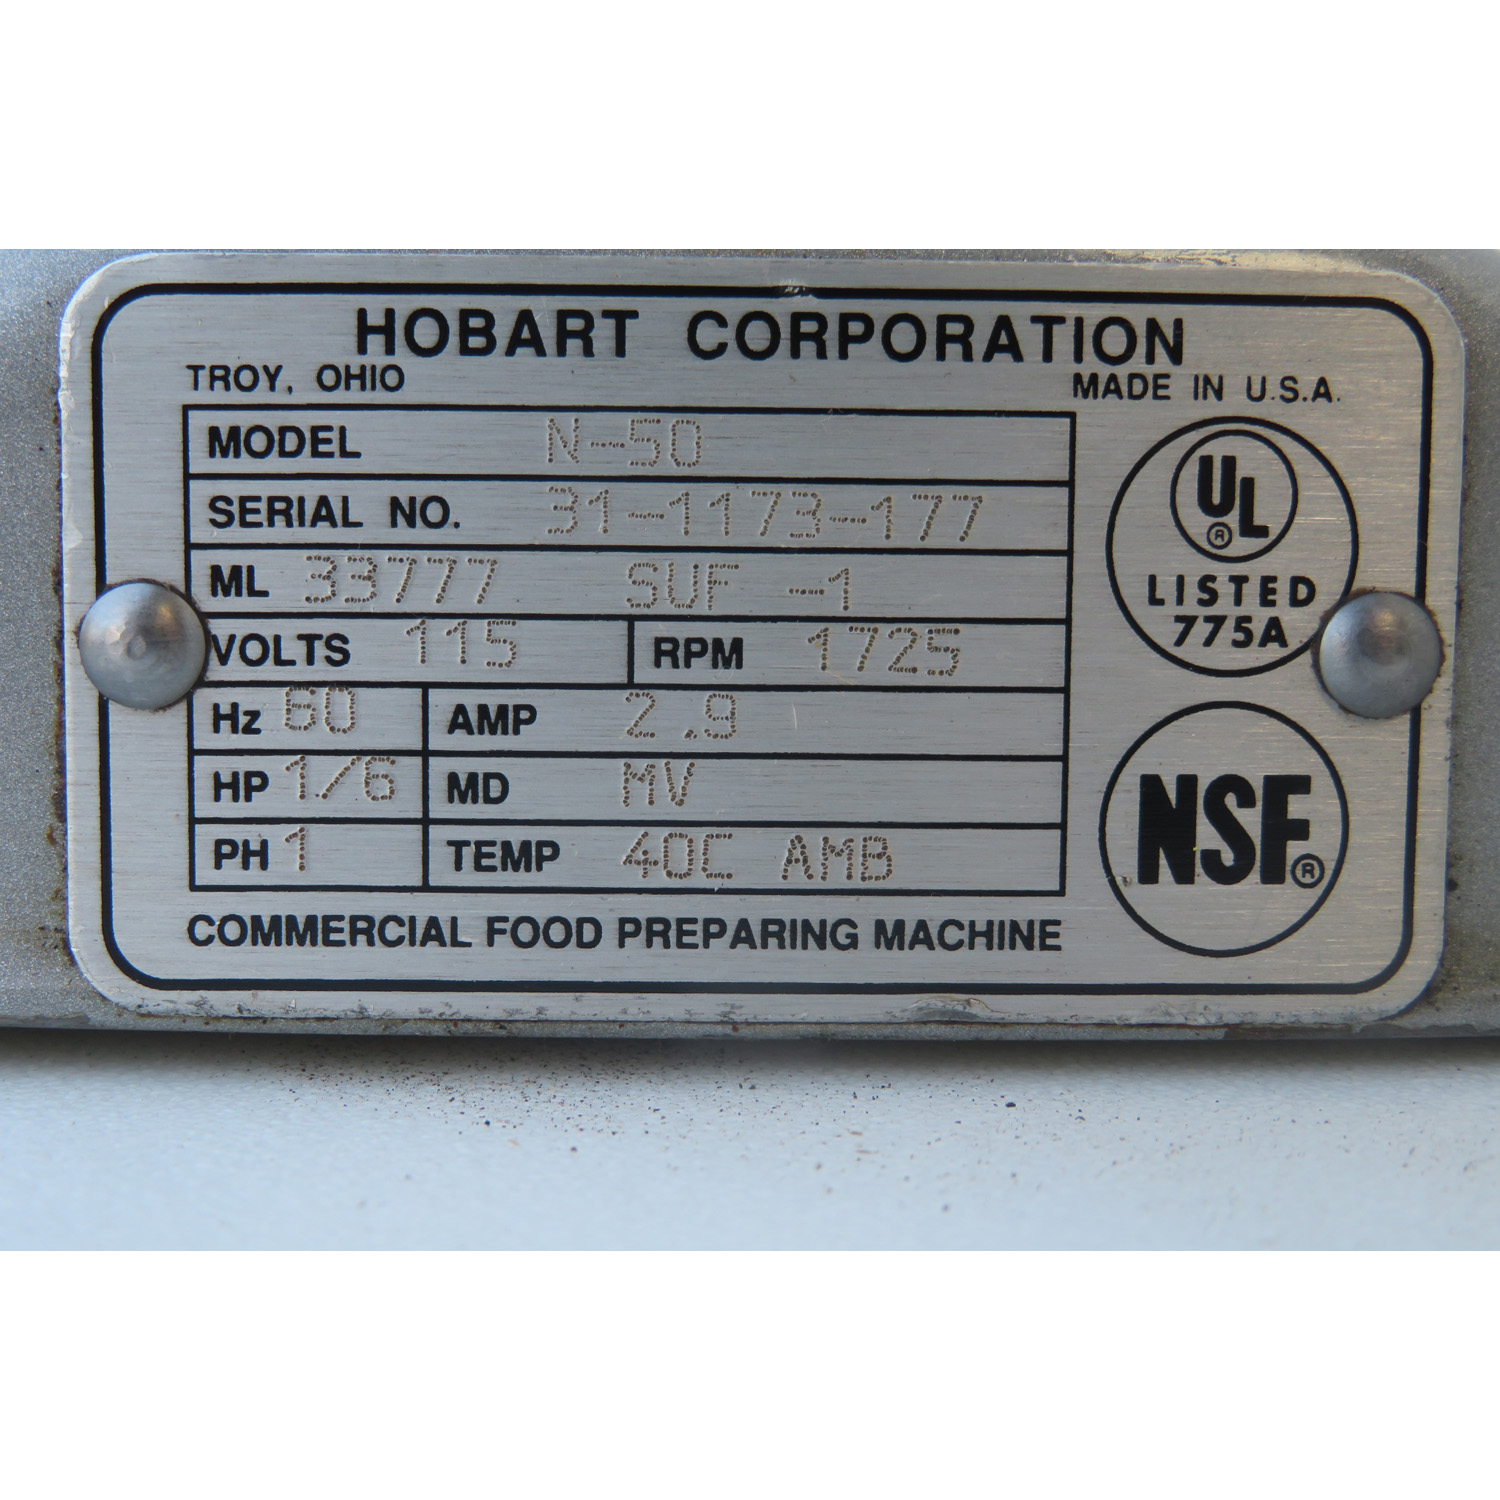 Hobart 5 Quart N50 Mixer, Used Great Condition image 3